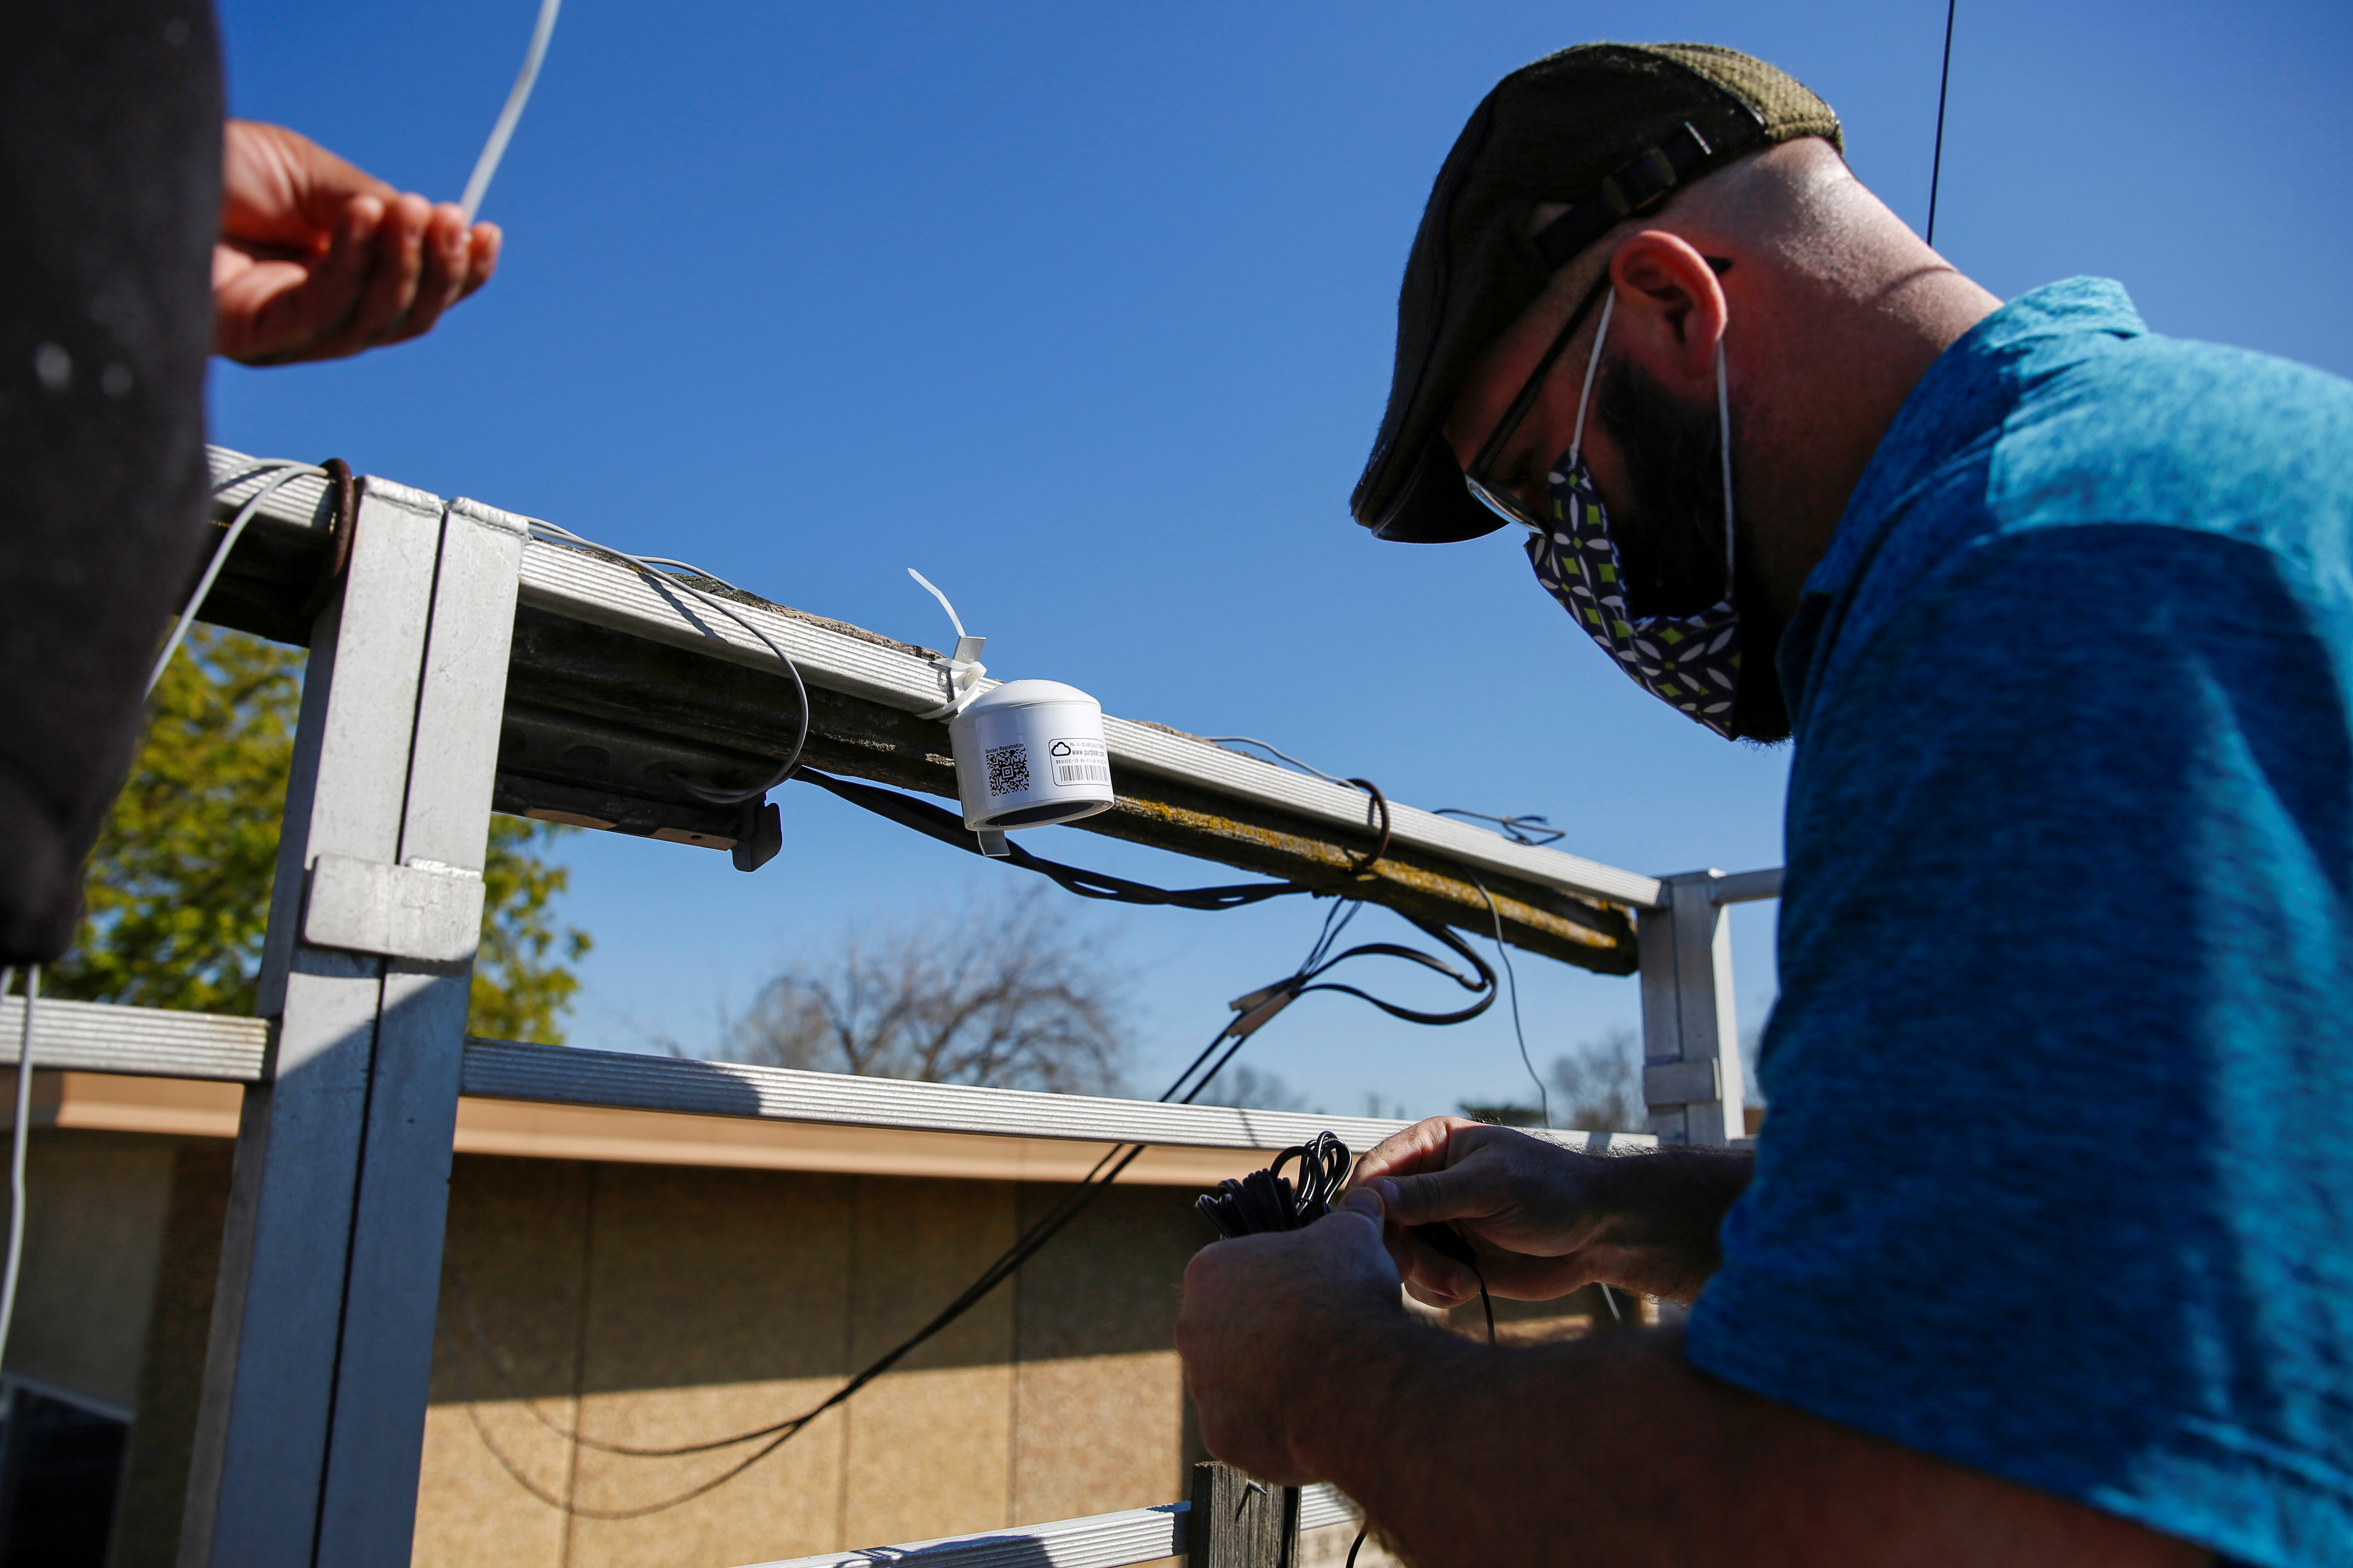 Matt Holmes, a community engagement specialist with Little Manila Rising, installs a low-cost remote air sensor by Purple Air at a monitoring station in Stockton, California, U.S., March 12, 2021.  REUTERS/Brittany Hosea-Small